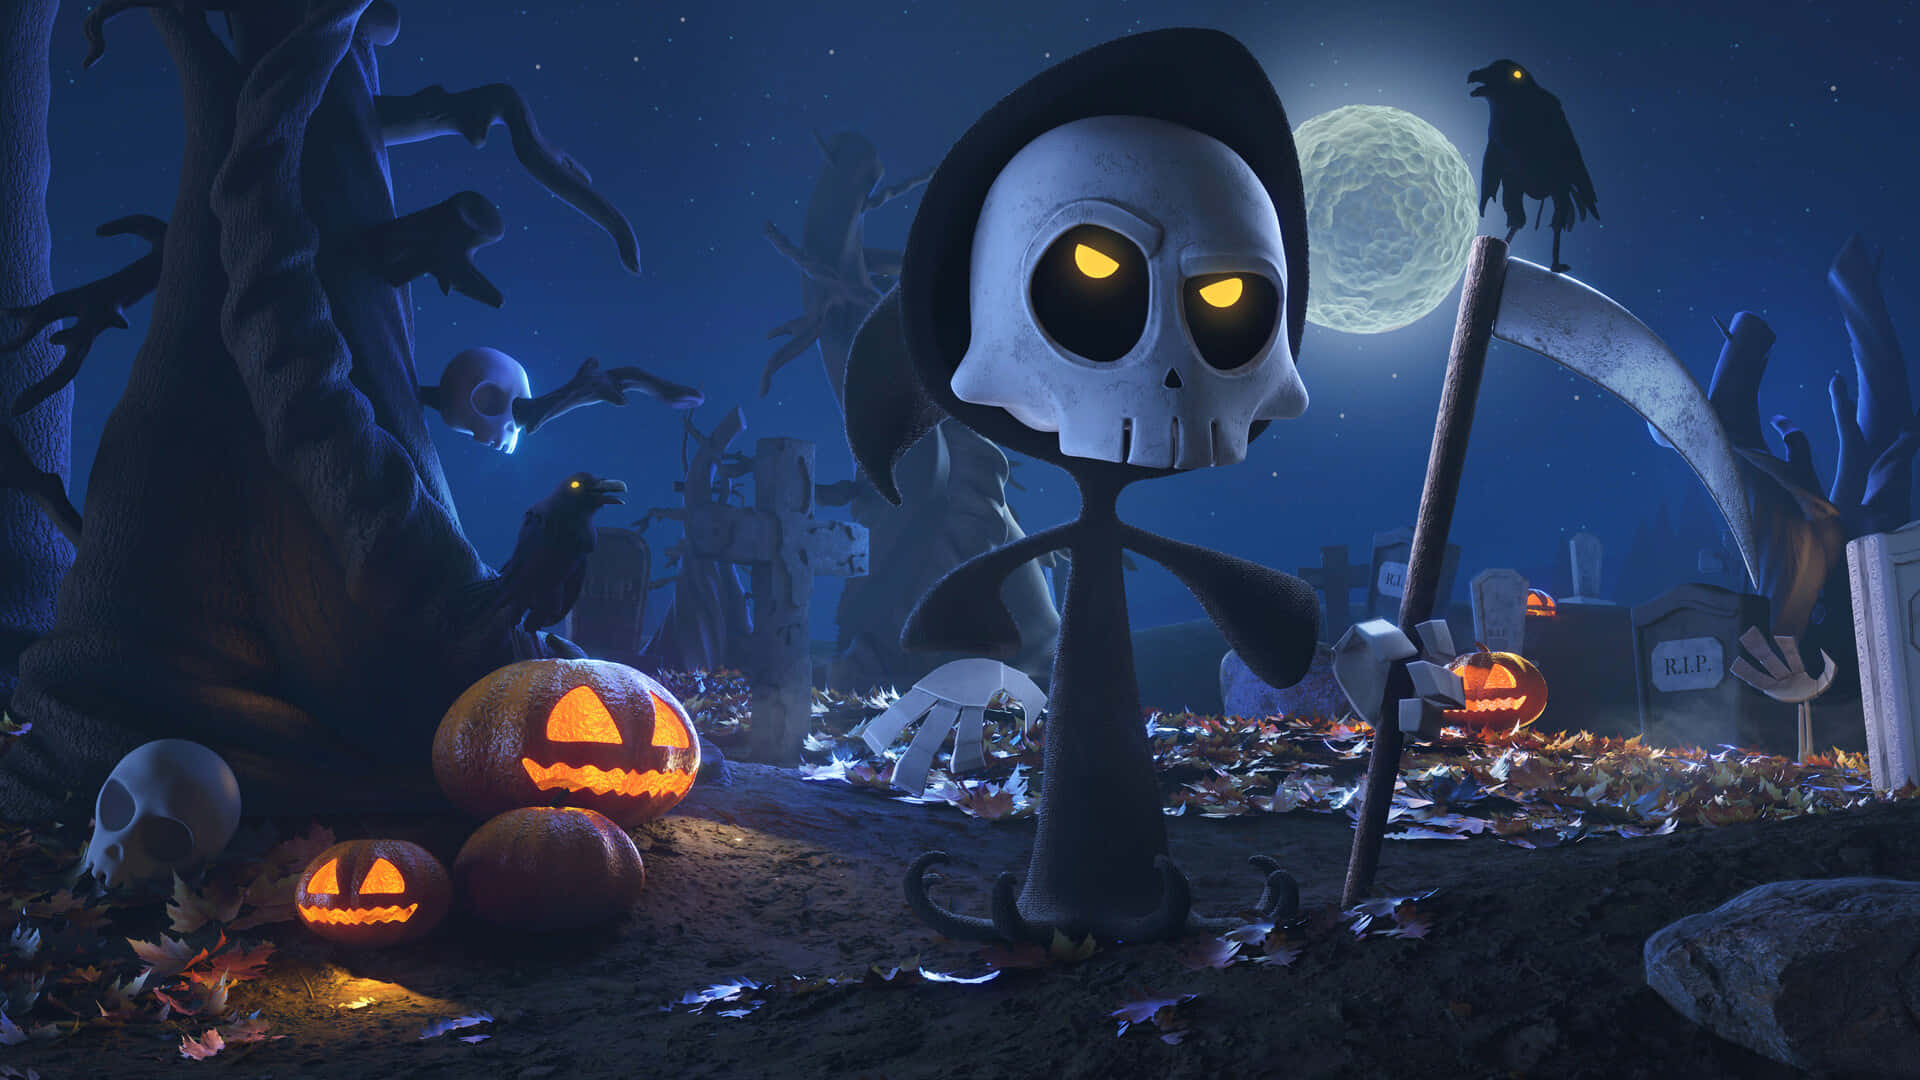 Get ready to be spooked this Halloween! Wallpaper